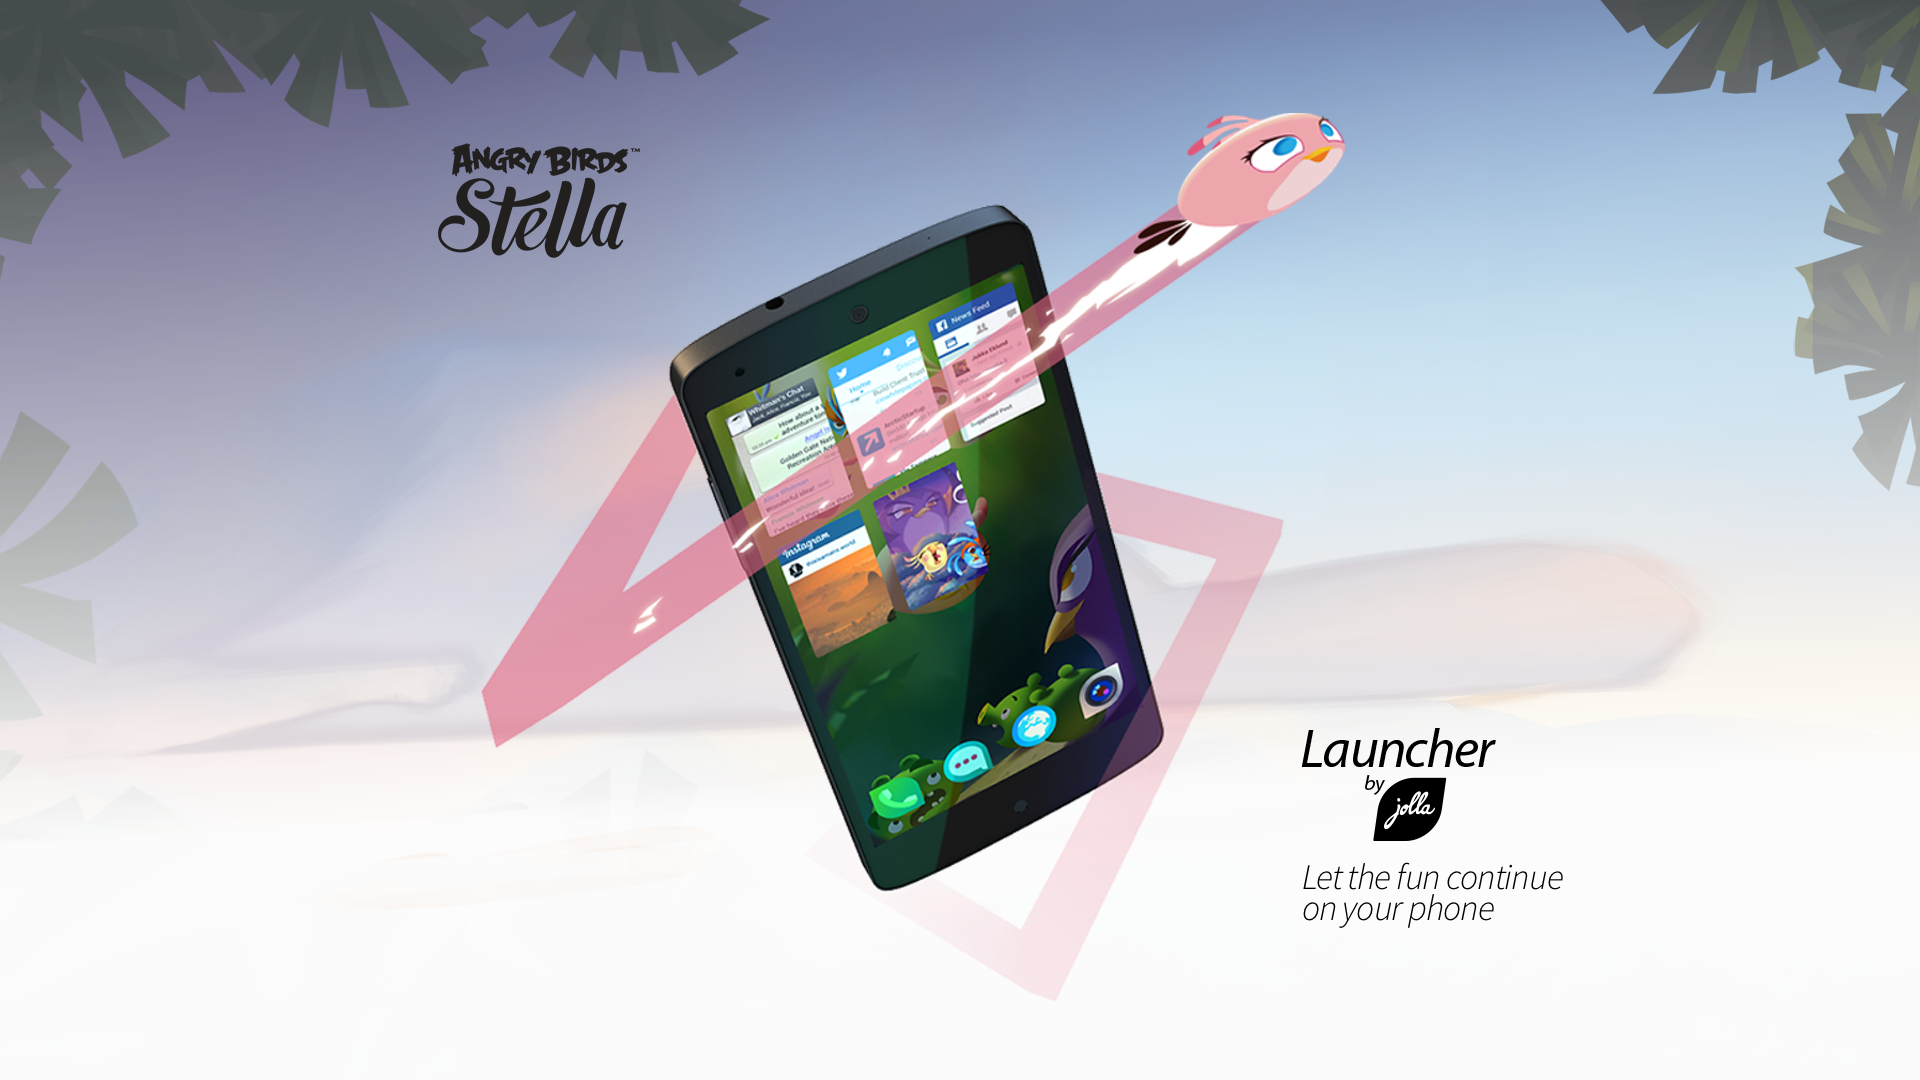 Jolla Adds Angry Birds Themed Launcher to Promote Sailfish OS